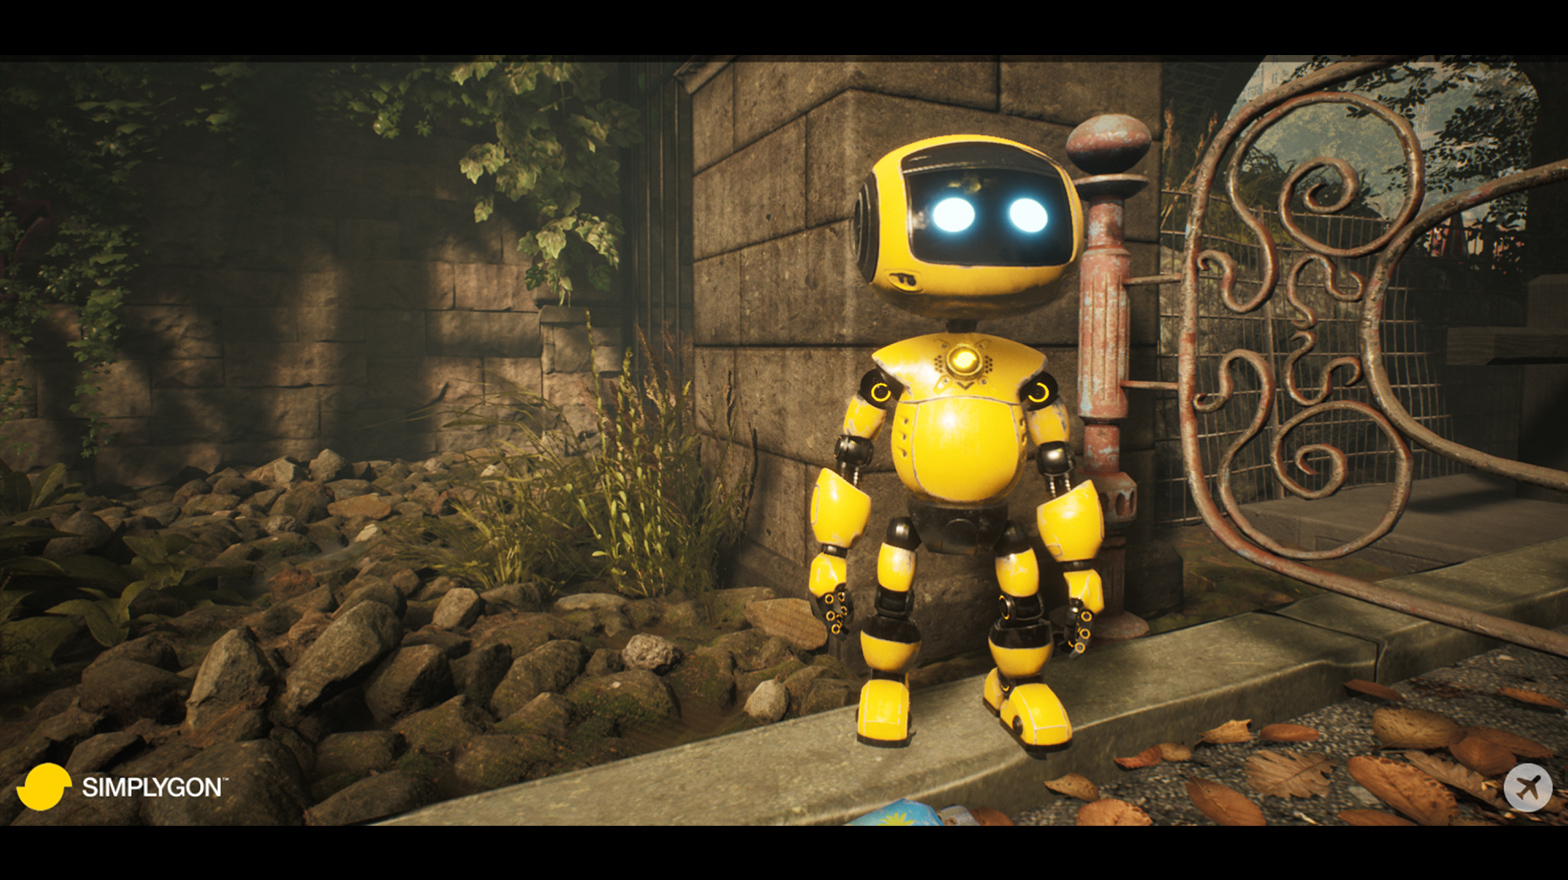 Poly, a yellow humanoid robot, standing on a path looking into the distance